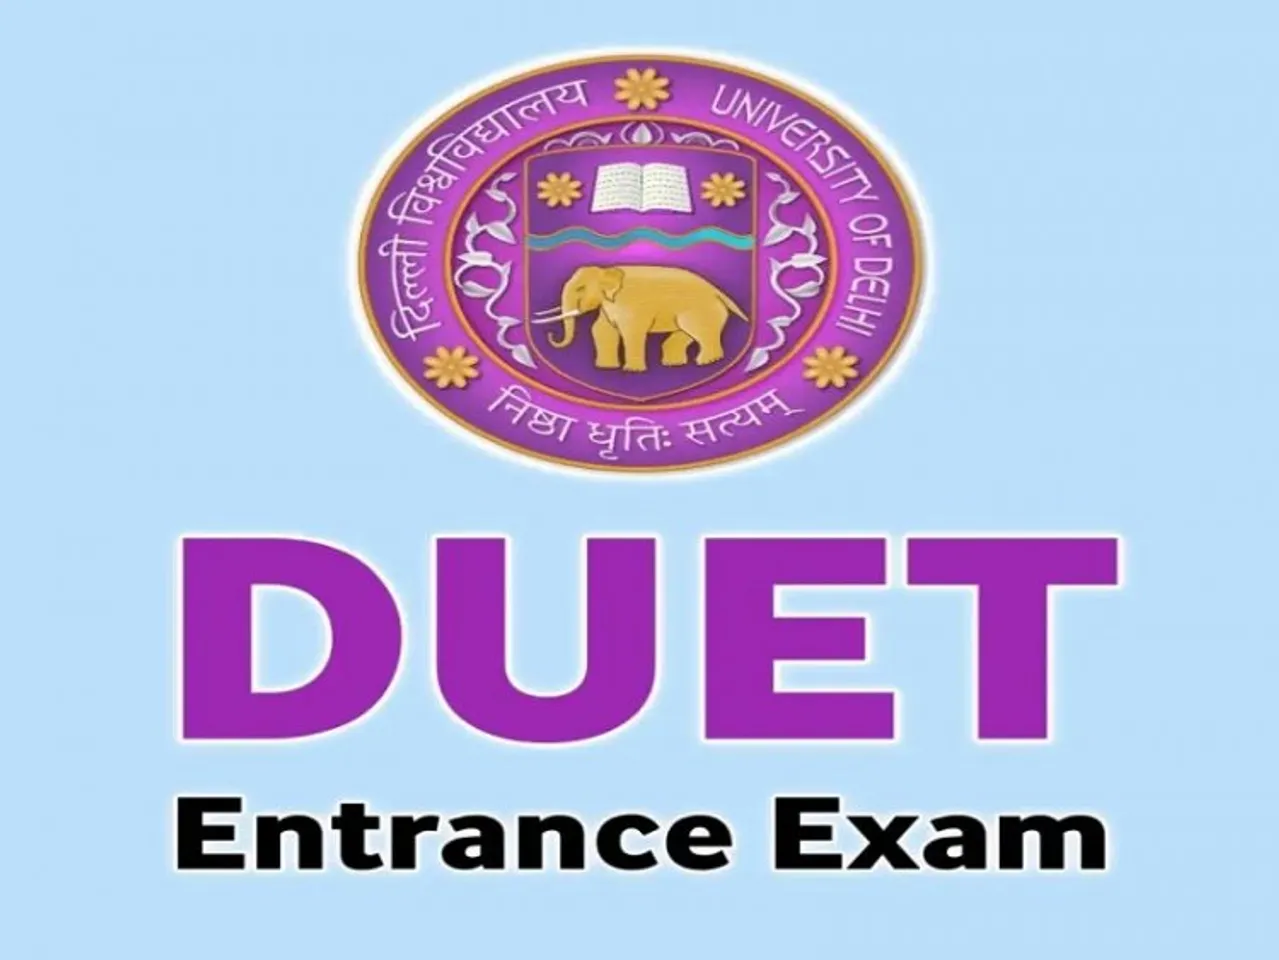 Entrance test for PG programmes at DU likely in second week of October